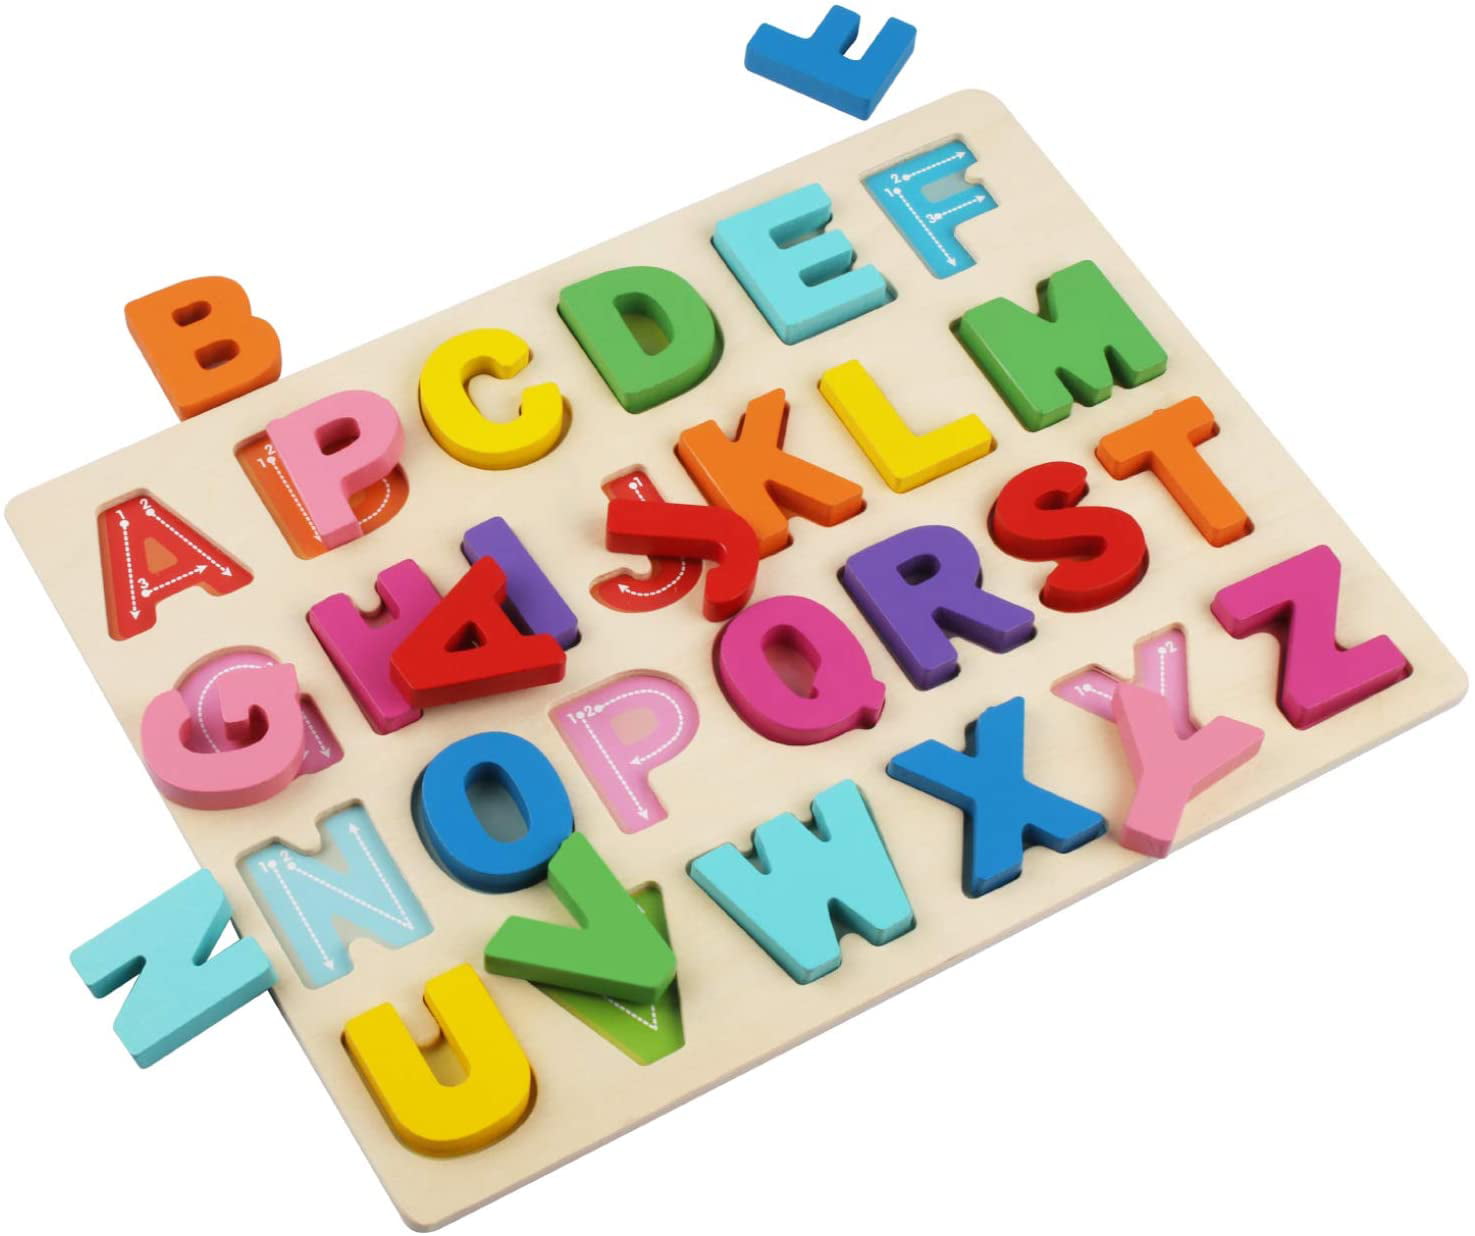 Alphabet Learning Toys For Toddlers 15 Best Alphabet Learning Toys 2021 ...